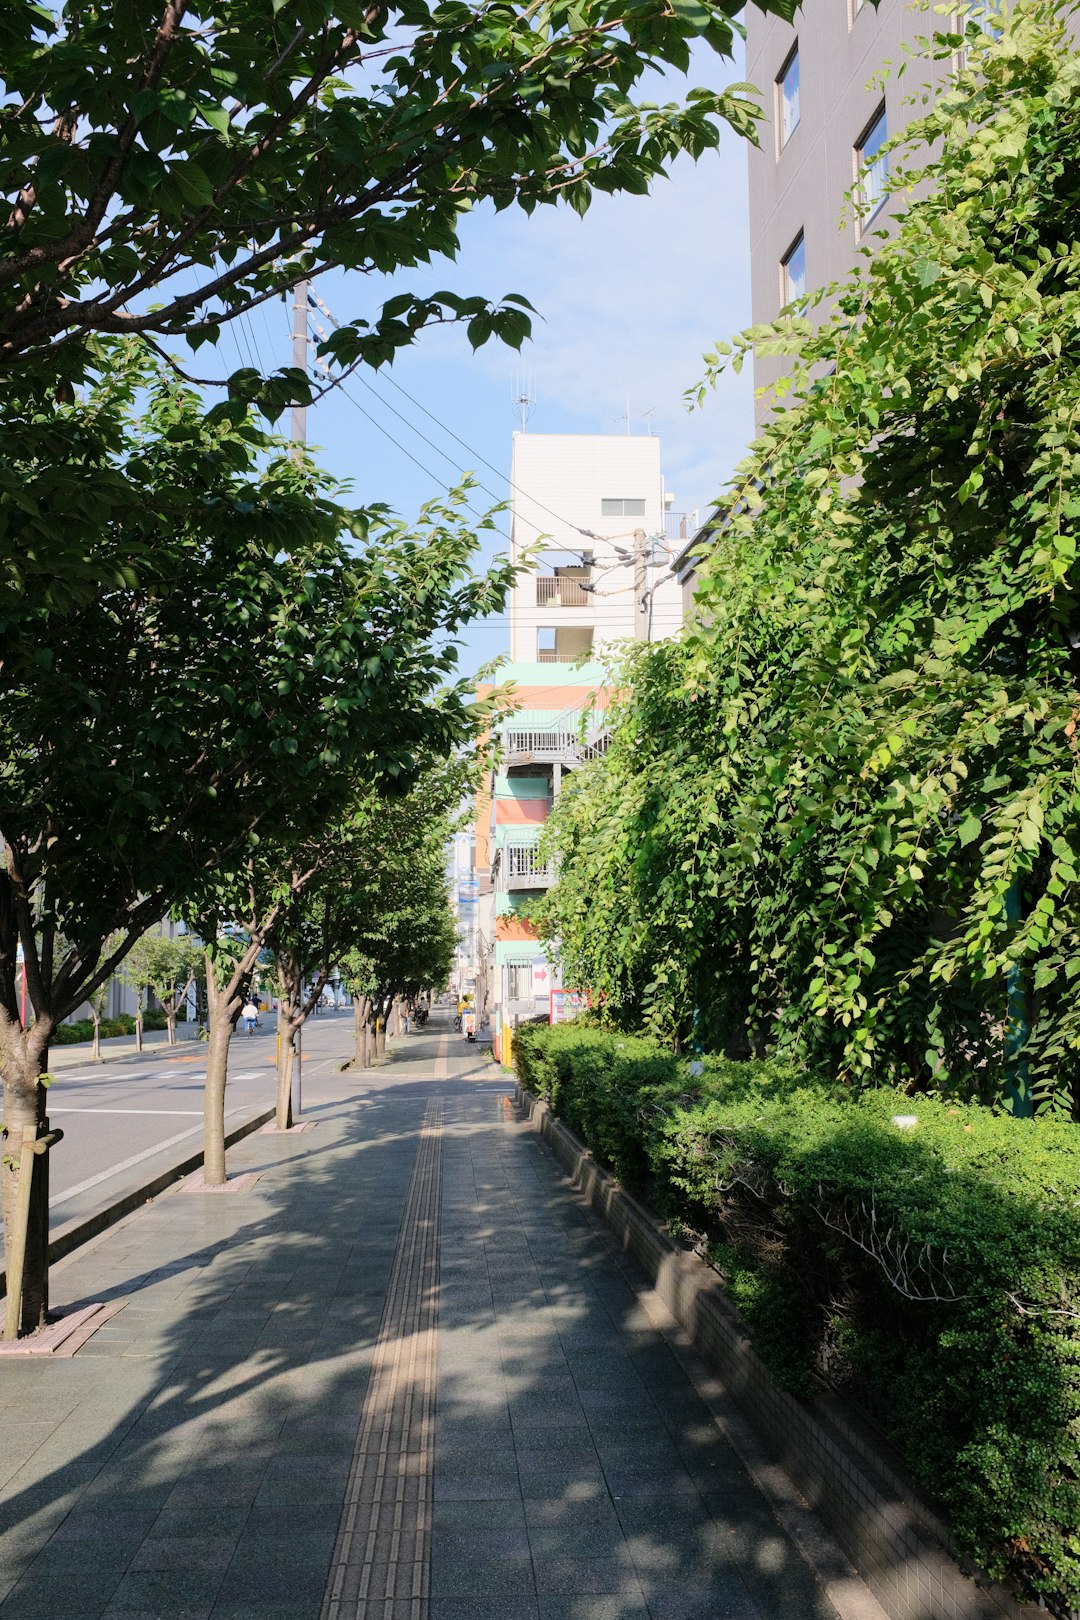 green trees beside gray concrete road during daytime